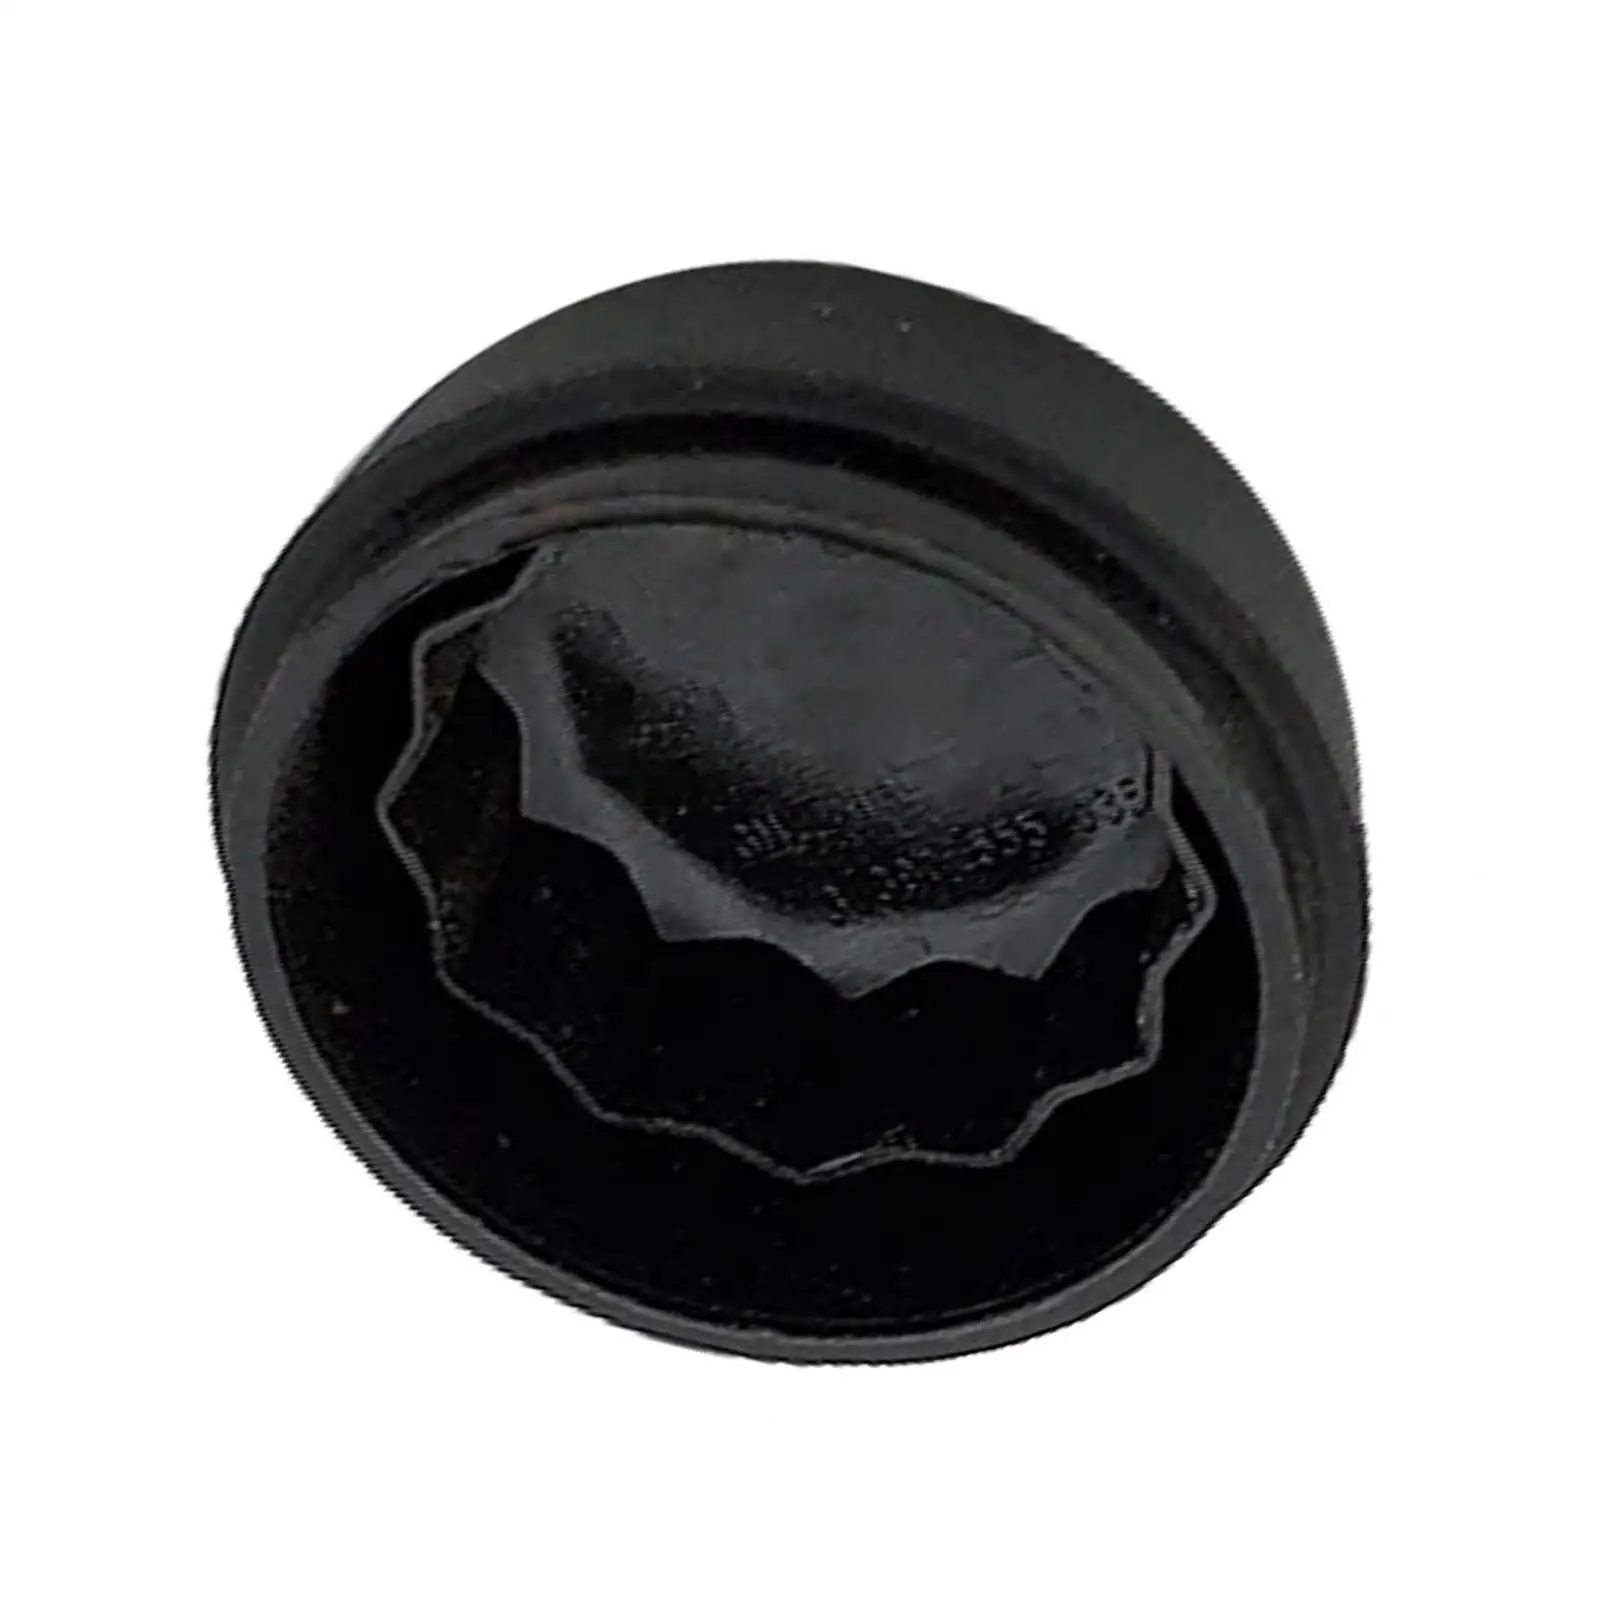 Windshield Wiper Arm Nut Cap Replacement 1106610-00-a for Tesla Model 3 Car